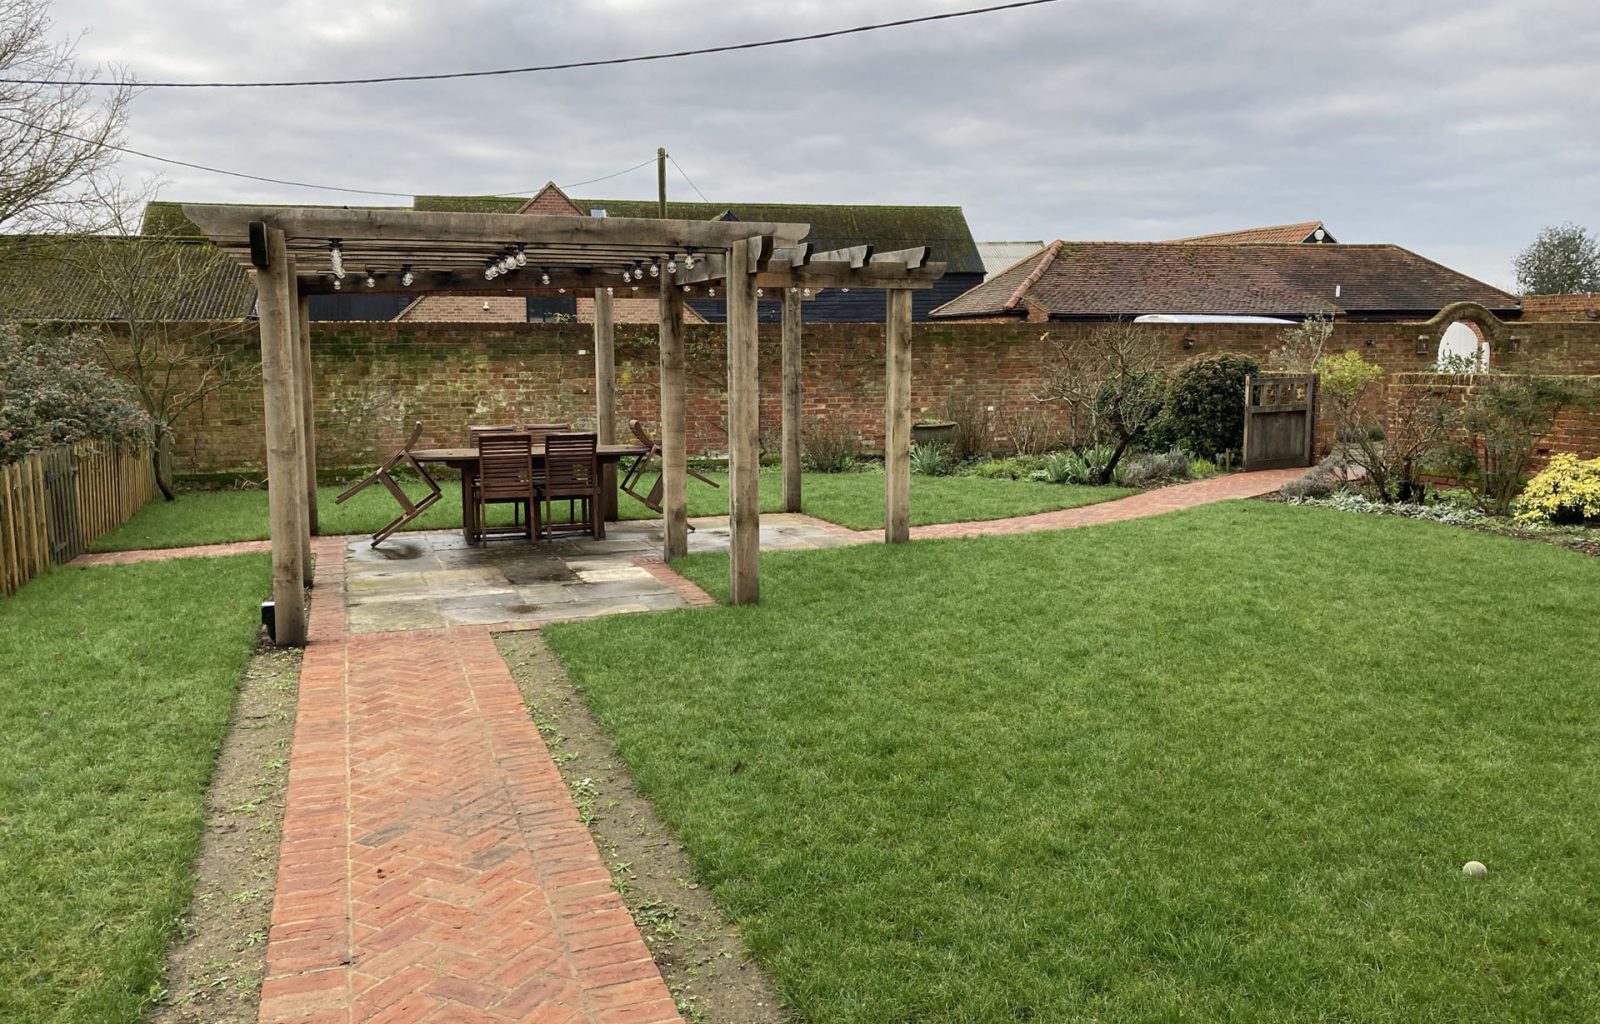 Landscaped garden enclosed by brick wall containing a wooden pergola with lighting in the middle of the garden over garden feature on paved area and brick herringbone pathway to and from area